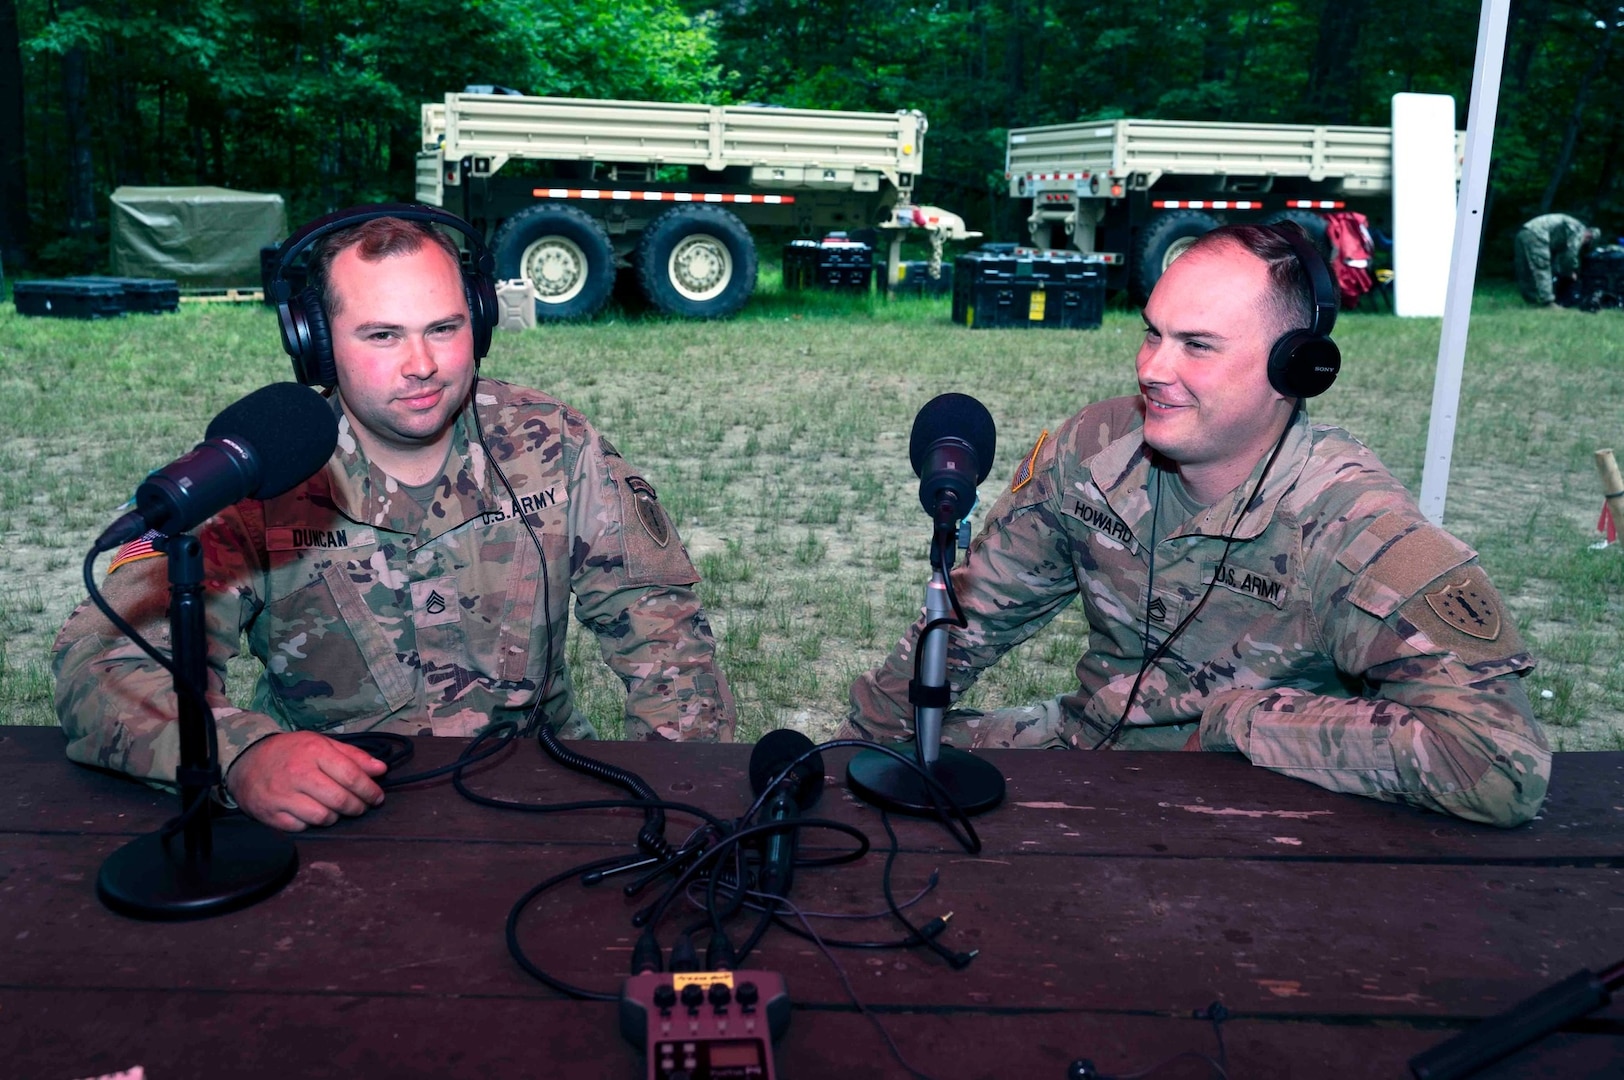 This episode of Your NH Guard features Staff Sgt. Lucas Duncan and Sgt. 1st Class Daniel Howard of Detachment 1, 185th Engineer Support Company, New Hampshire National Guard.